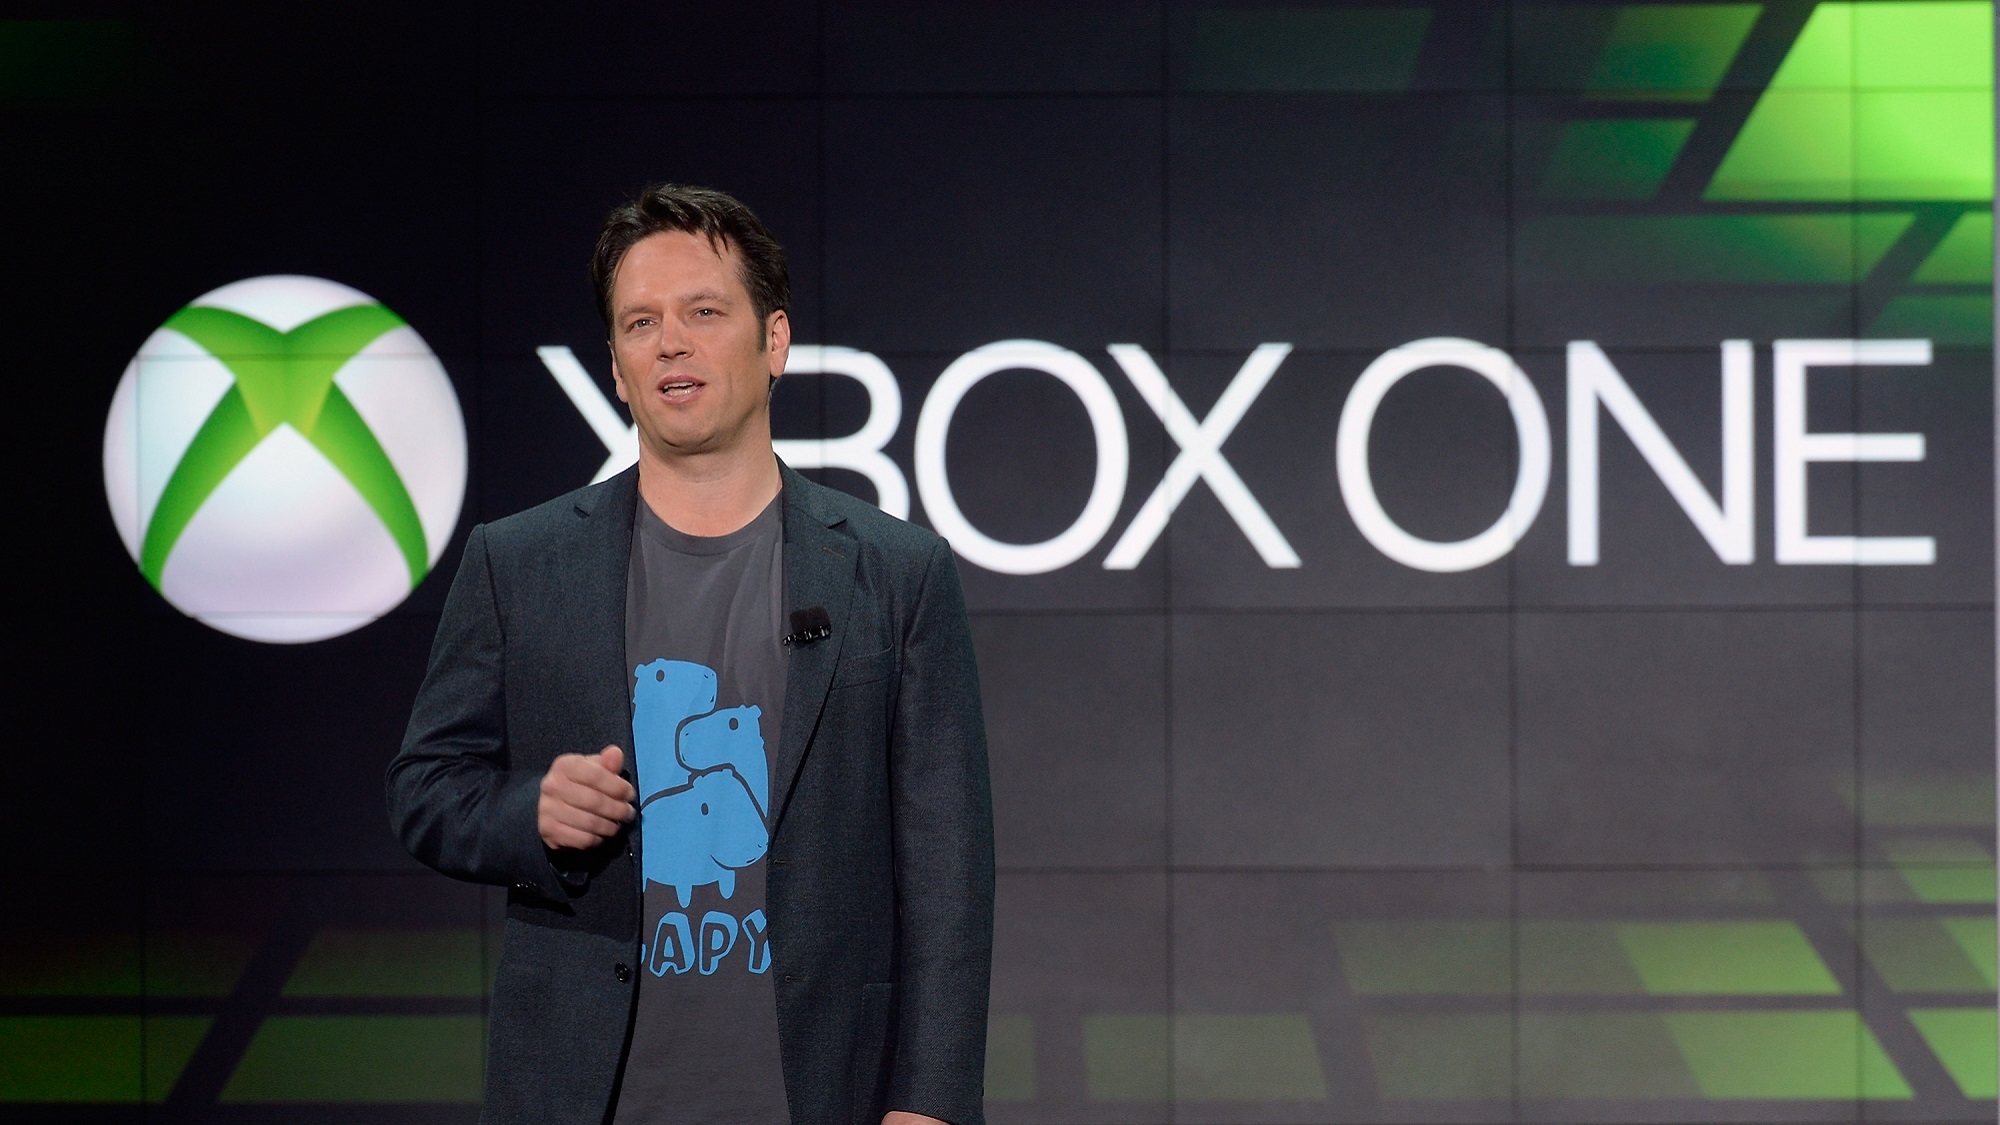 Phil Spencer, vice president of Microsoft Game Studios, Microsoft Corporation, speaks during the Microsoft Xbox press conference at the Electronic Entertainment Expo at the Galen Center on June 10, 2013 in Los Angeles, California.